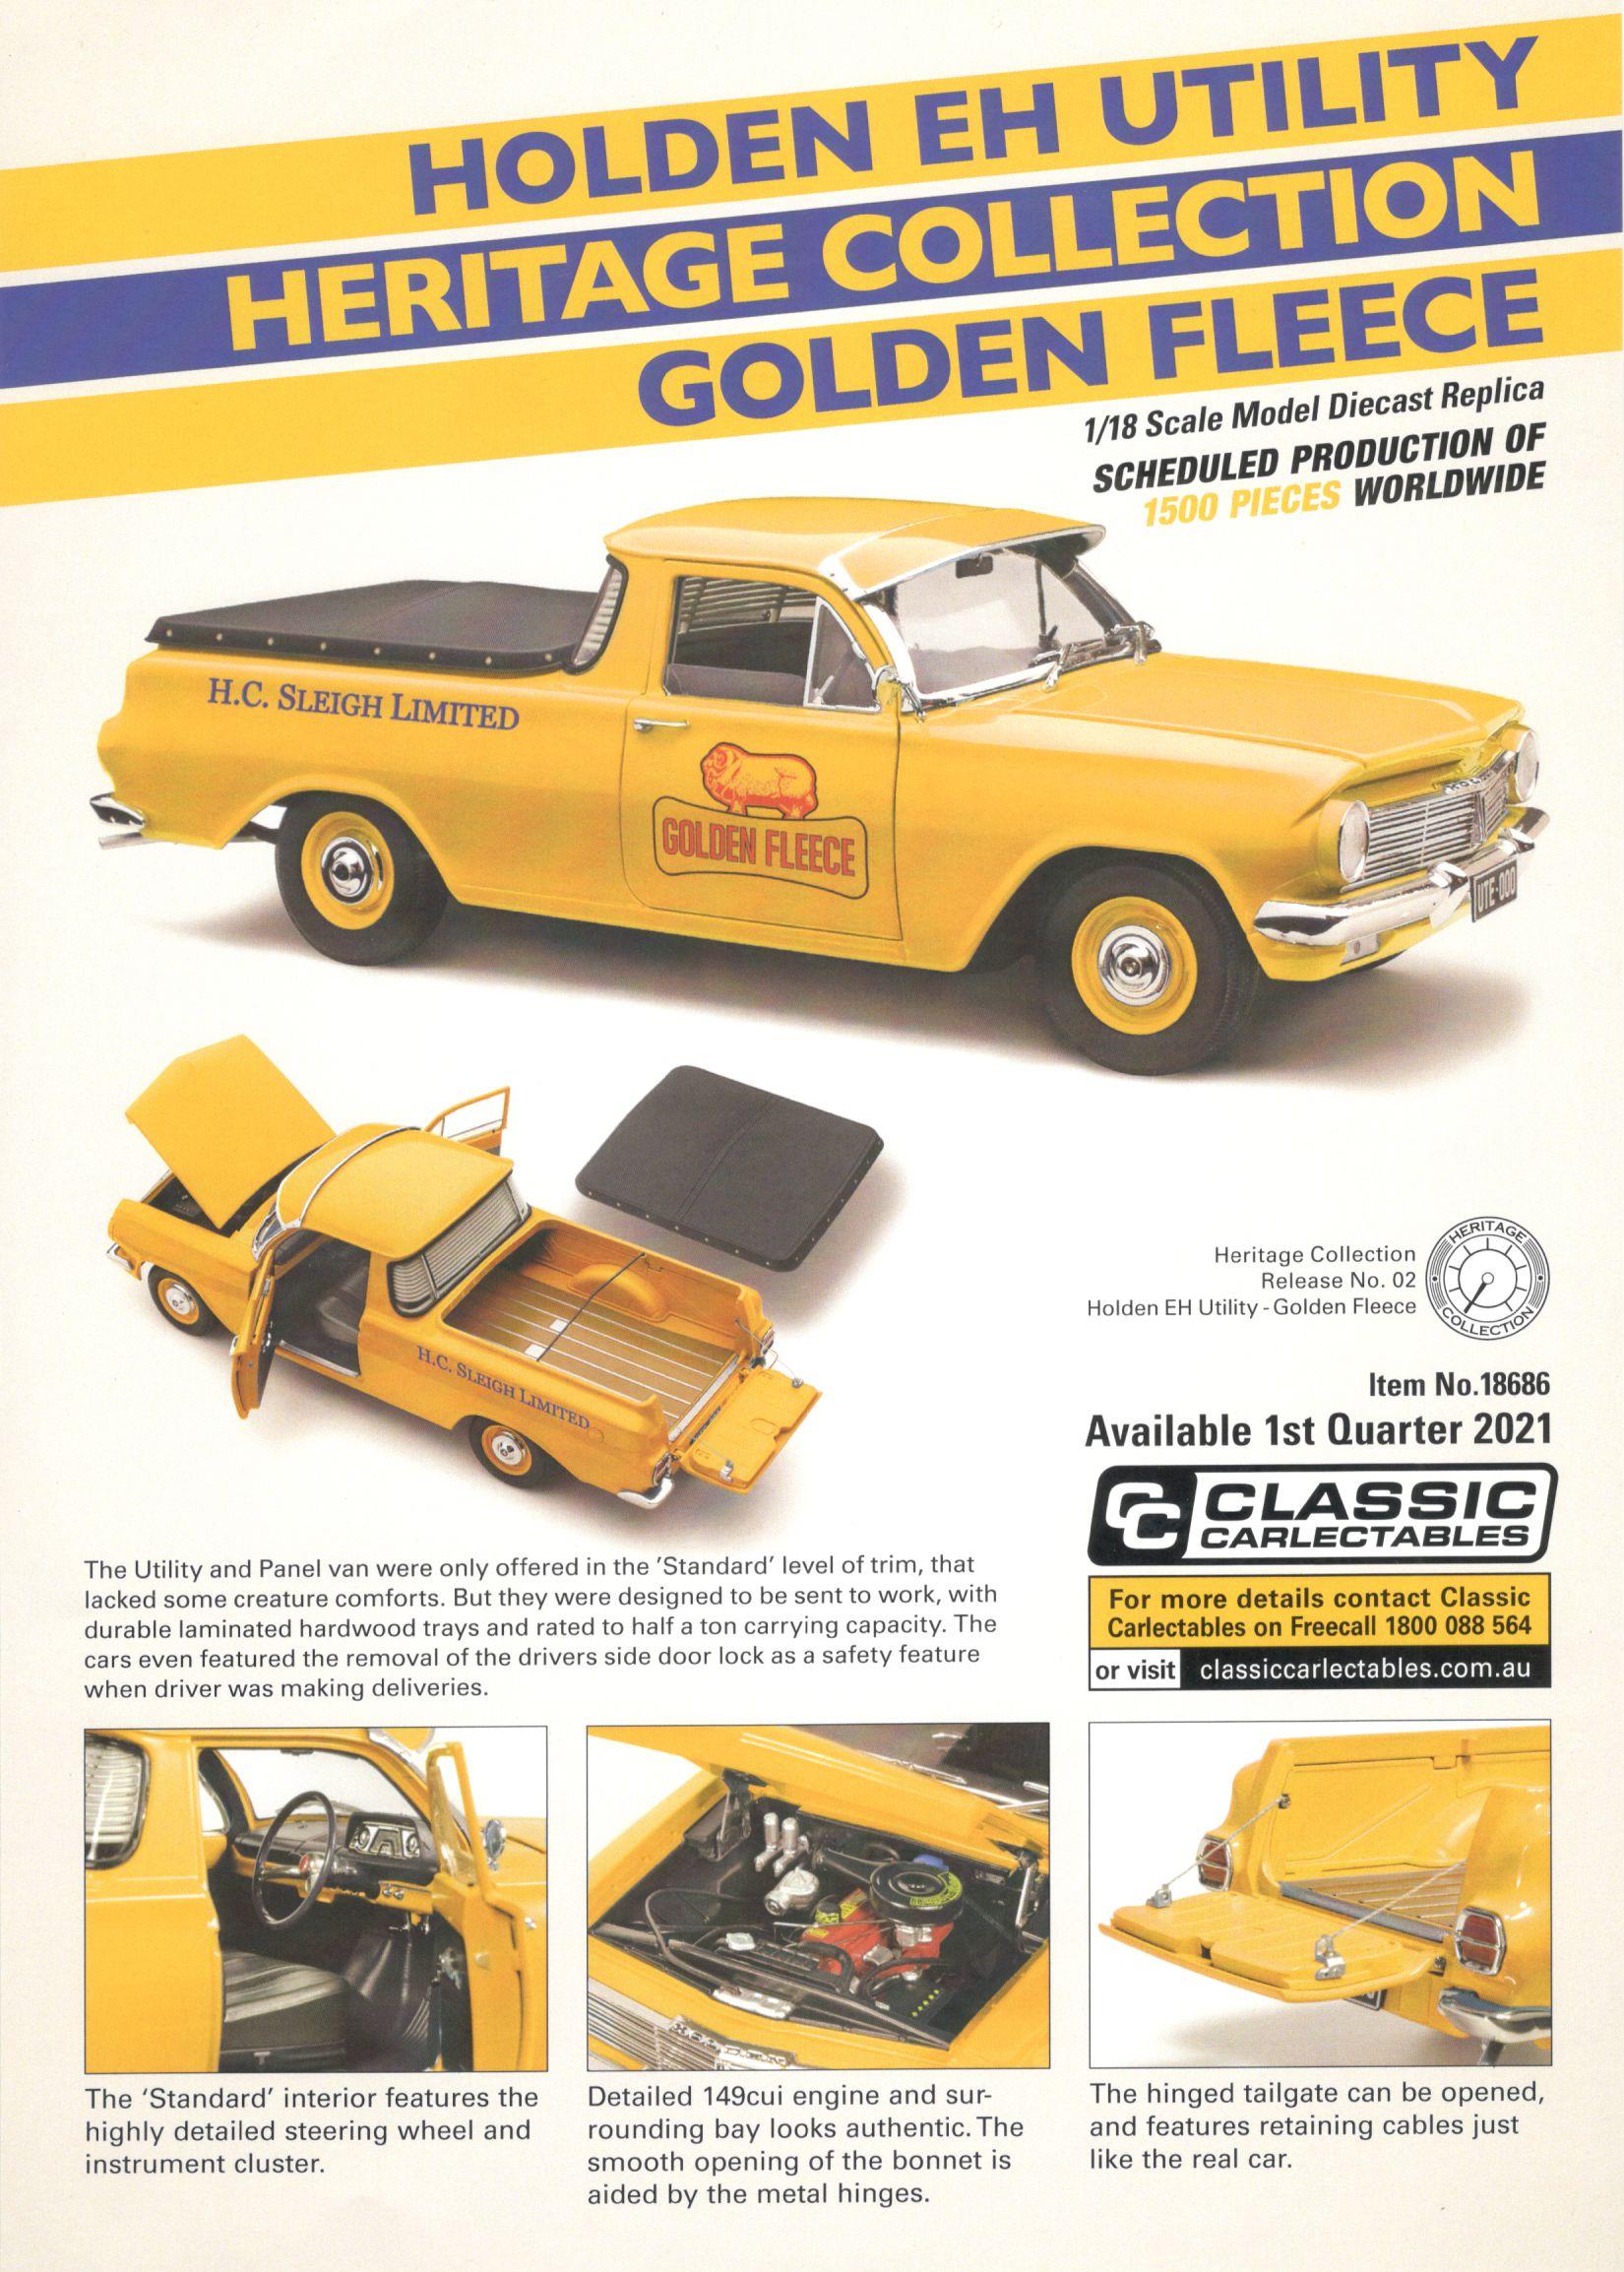 Classic Carlectables Holden EH Utility Heritage Collection Golden Fleece 18686